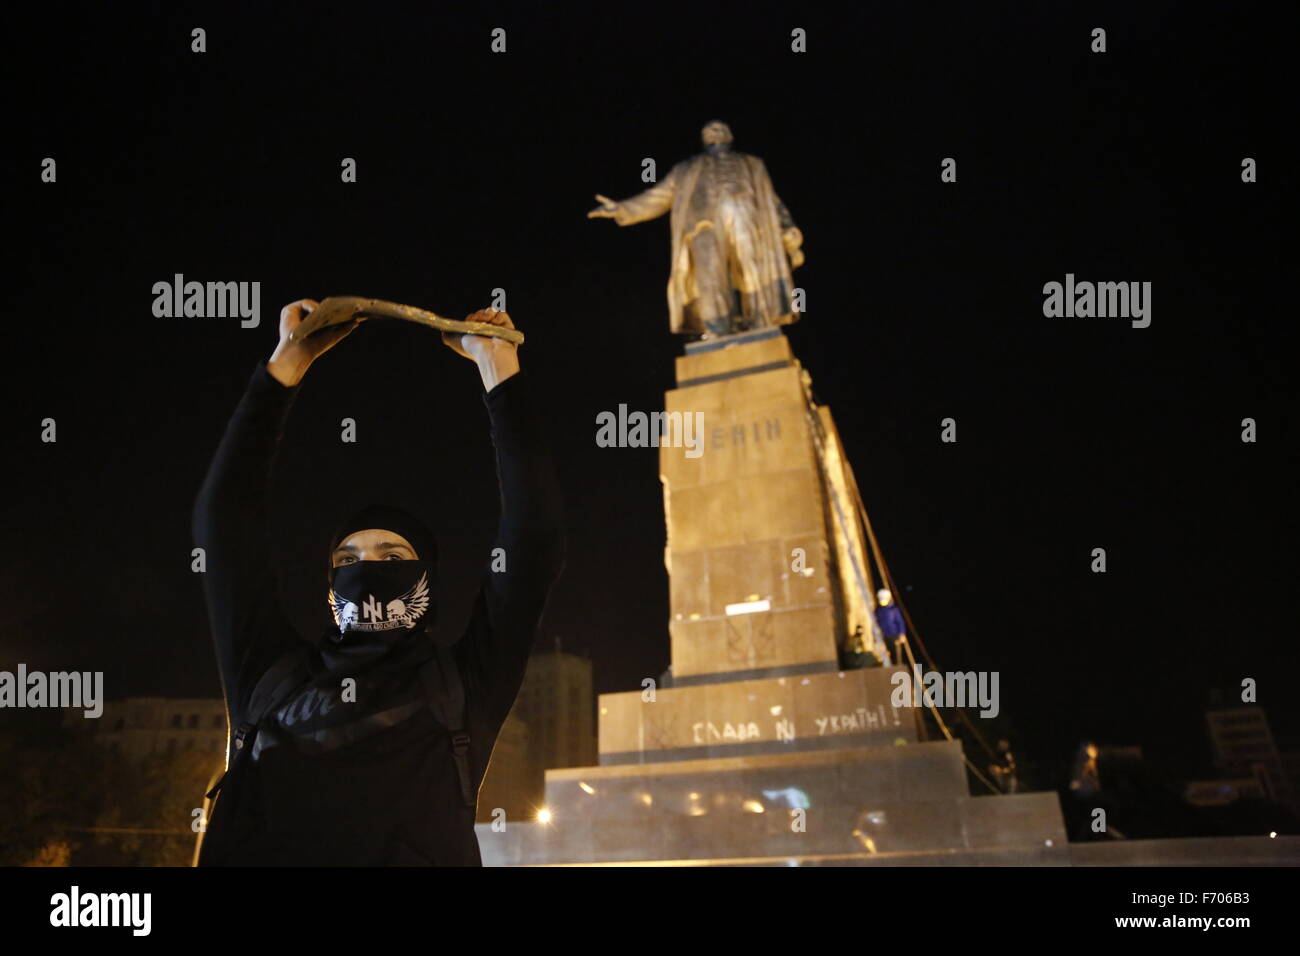 Ukrainianian protesters cut down the Lenin Statue on Freedom Square in Kharkiv, a predominately Russian speaking area. The statue, one of the largest in Ukraine, is on the largest square in the country. A member of the Azov Battalion holds a piece of the statue. Stock Photo